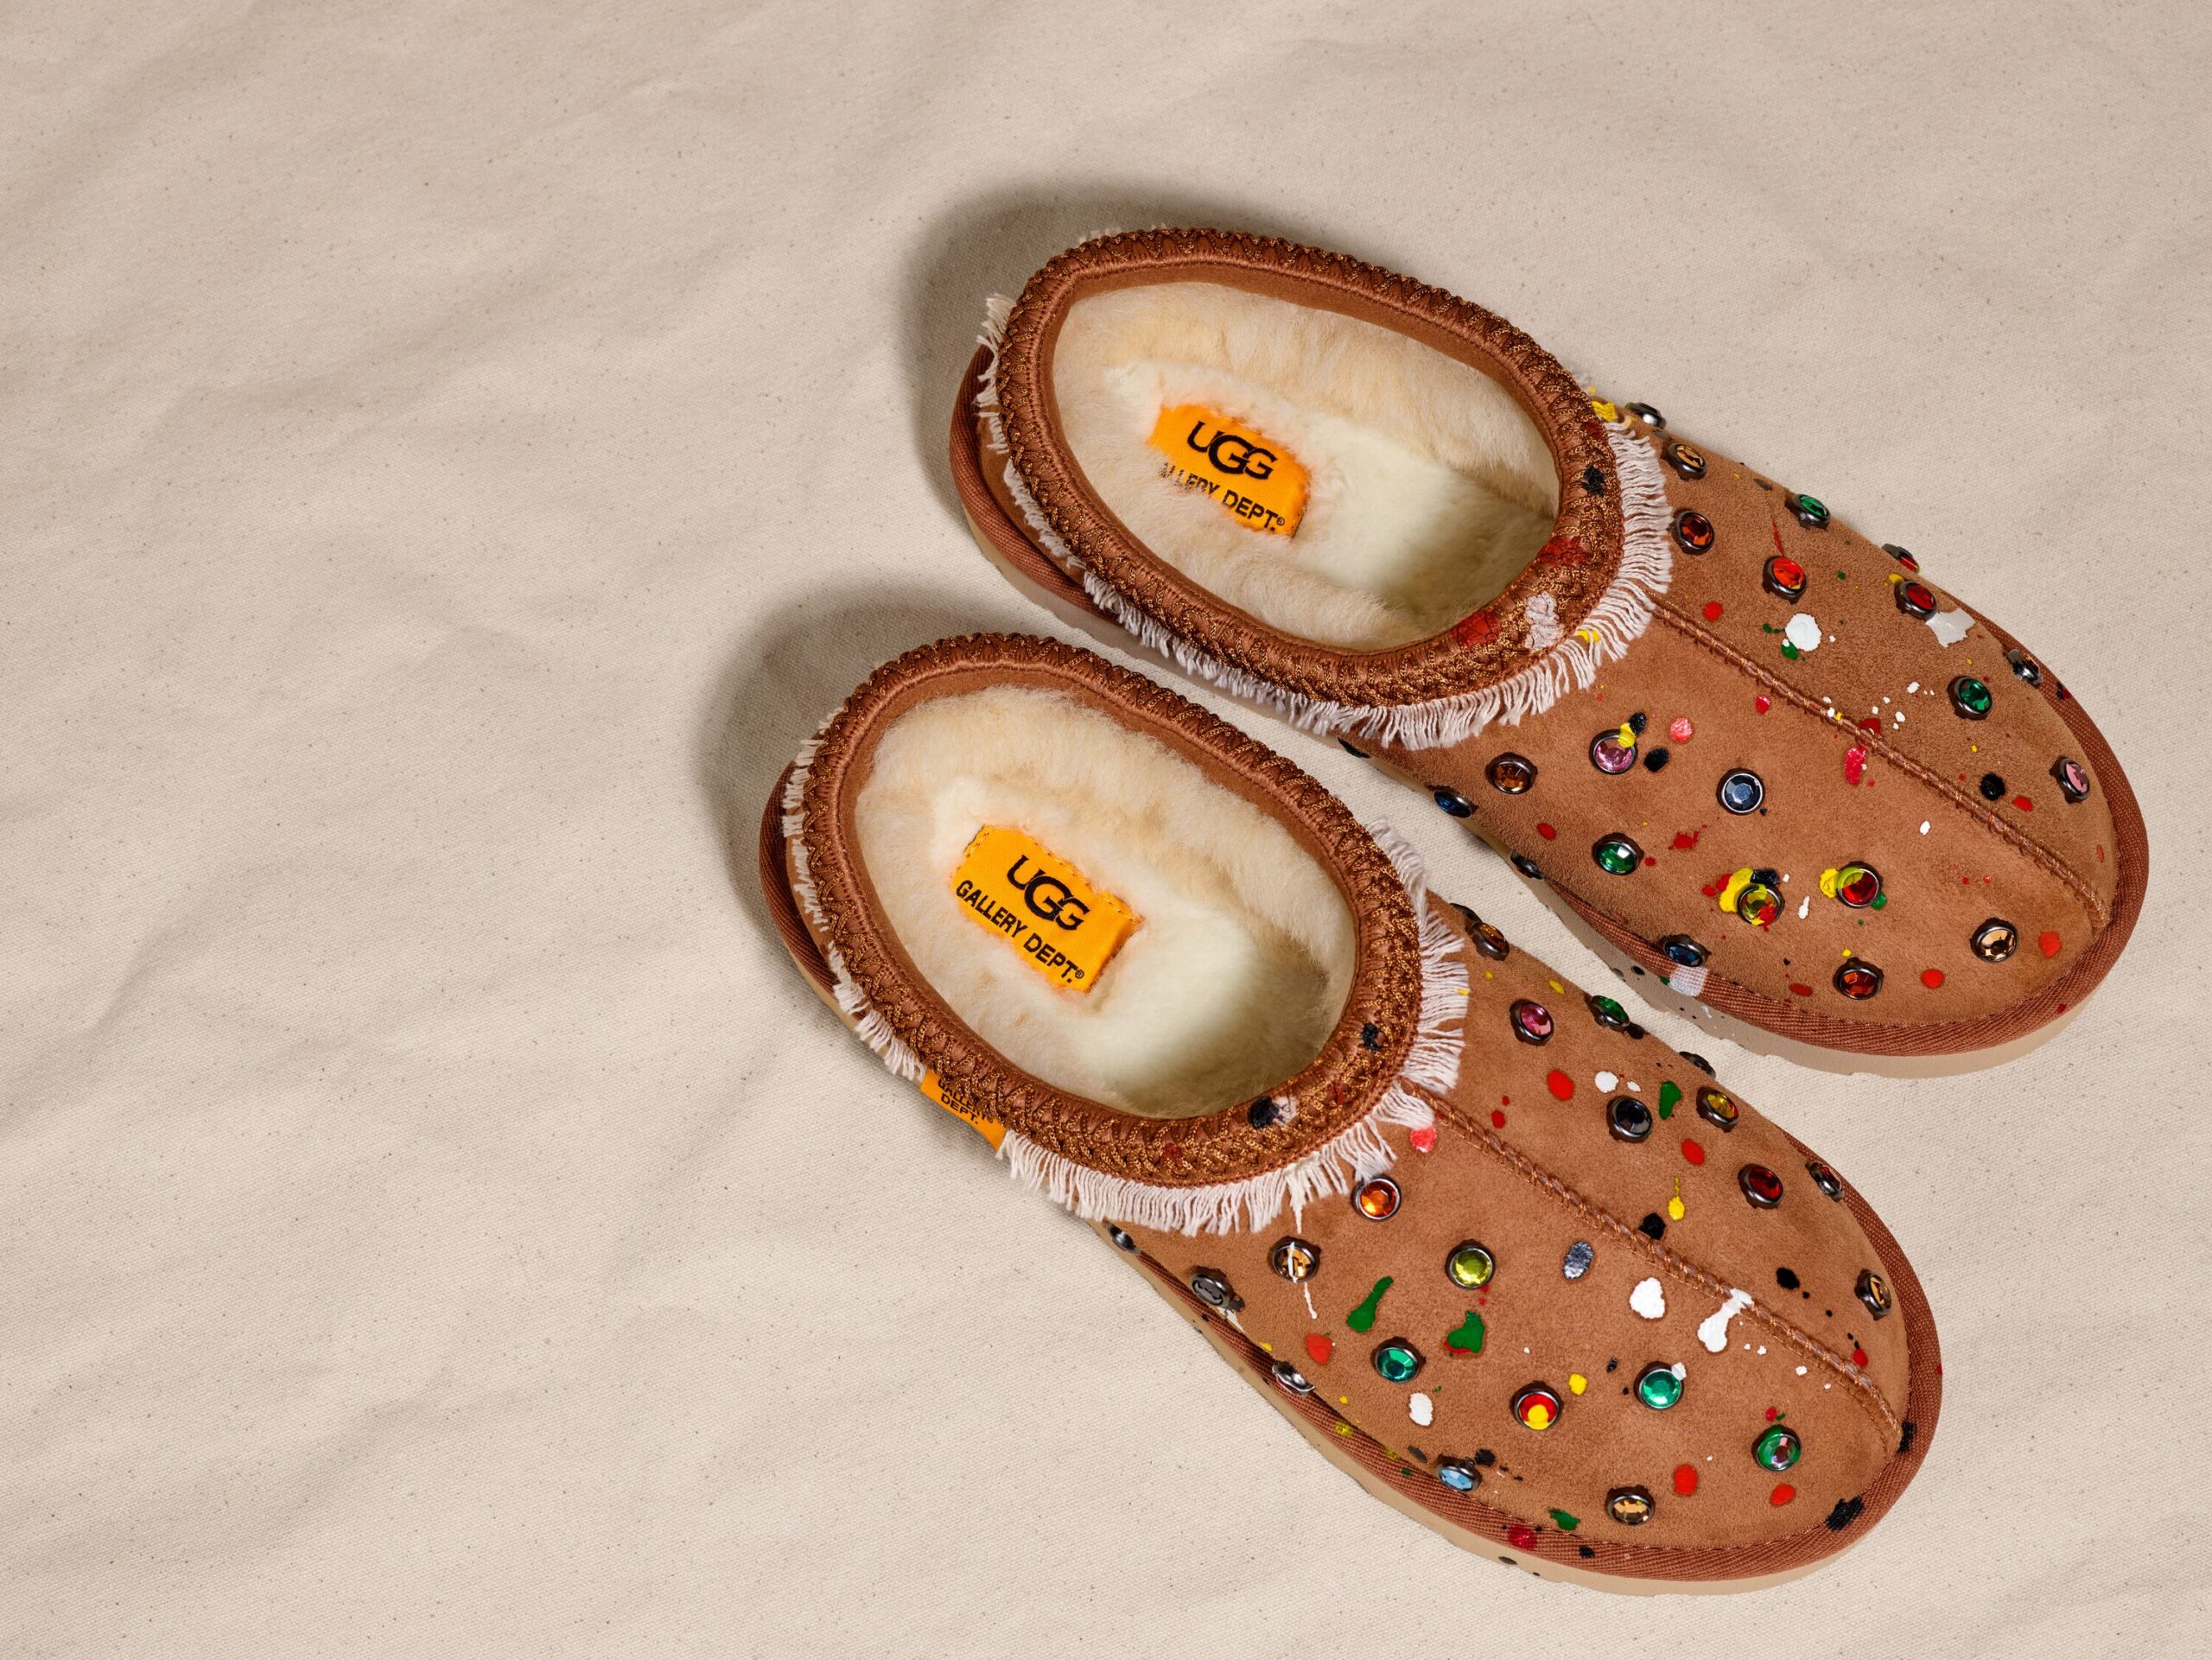 A pair of UGG x Gallery Dept. Tasman Slippers with chestnut suede adorned with colorful jewels and studs against a beige background.